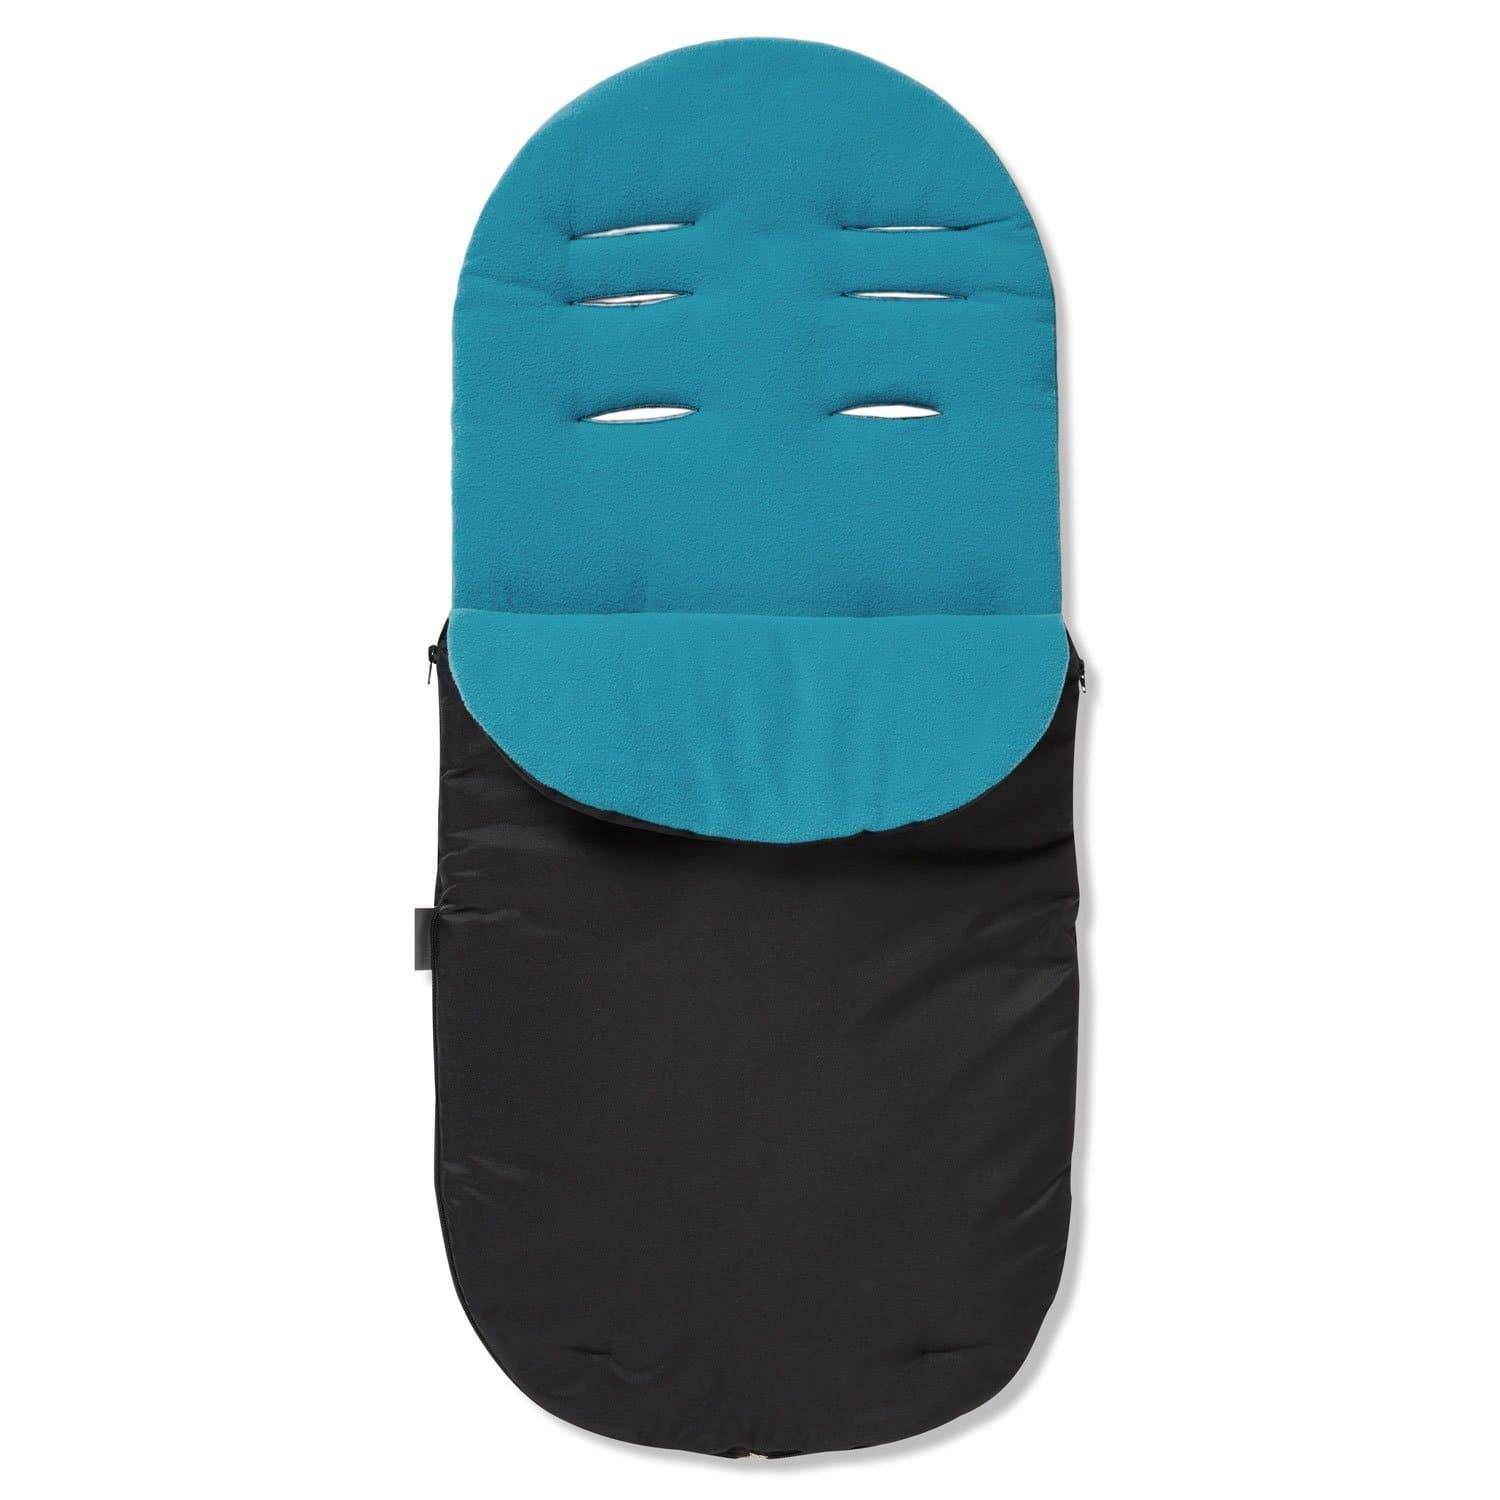 Footmuff / Cosy Toes Compatible with Joie - Turquoise / Fits All Models | For Your Little One